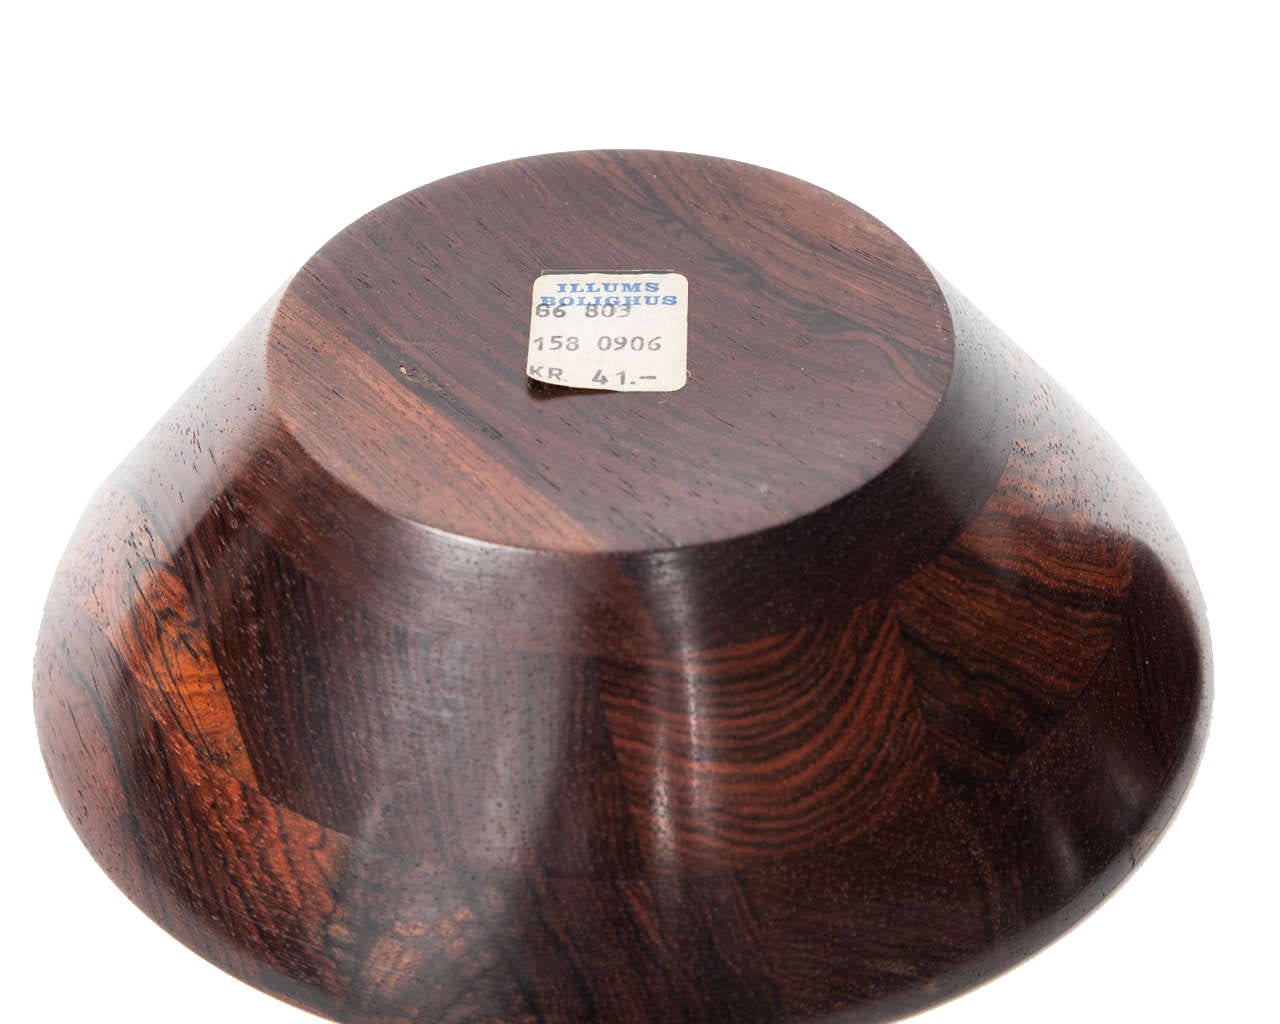 Trio of Danish Rosewood Bowls by Laurids Lonborg for Illums Bolighus 1